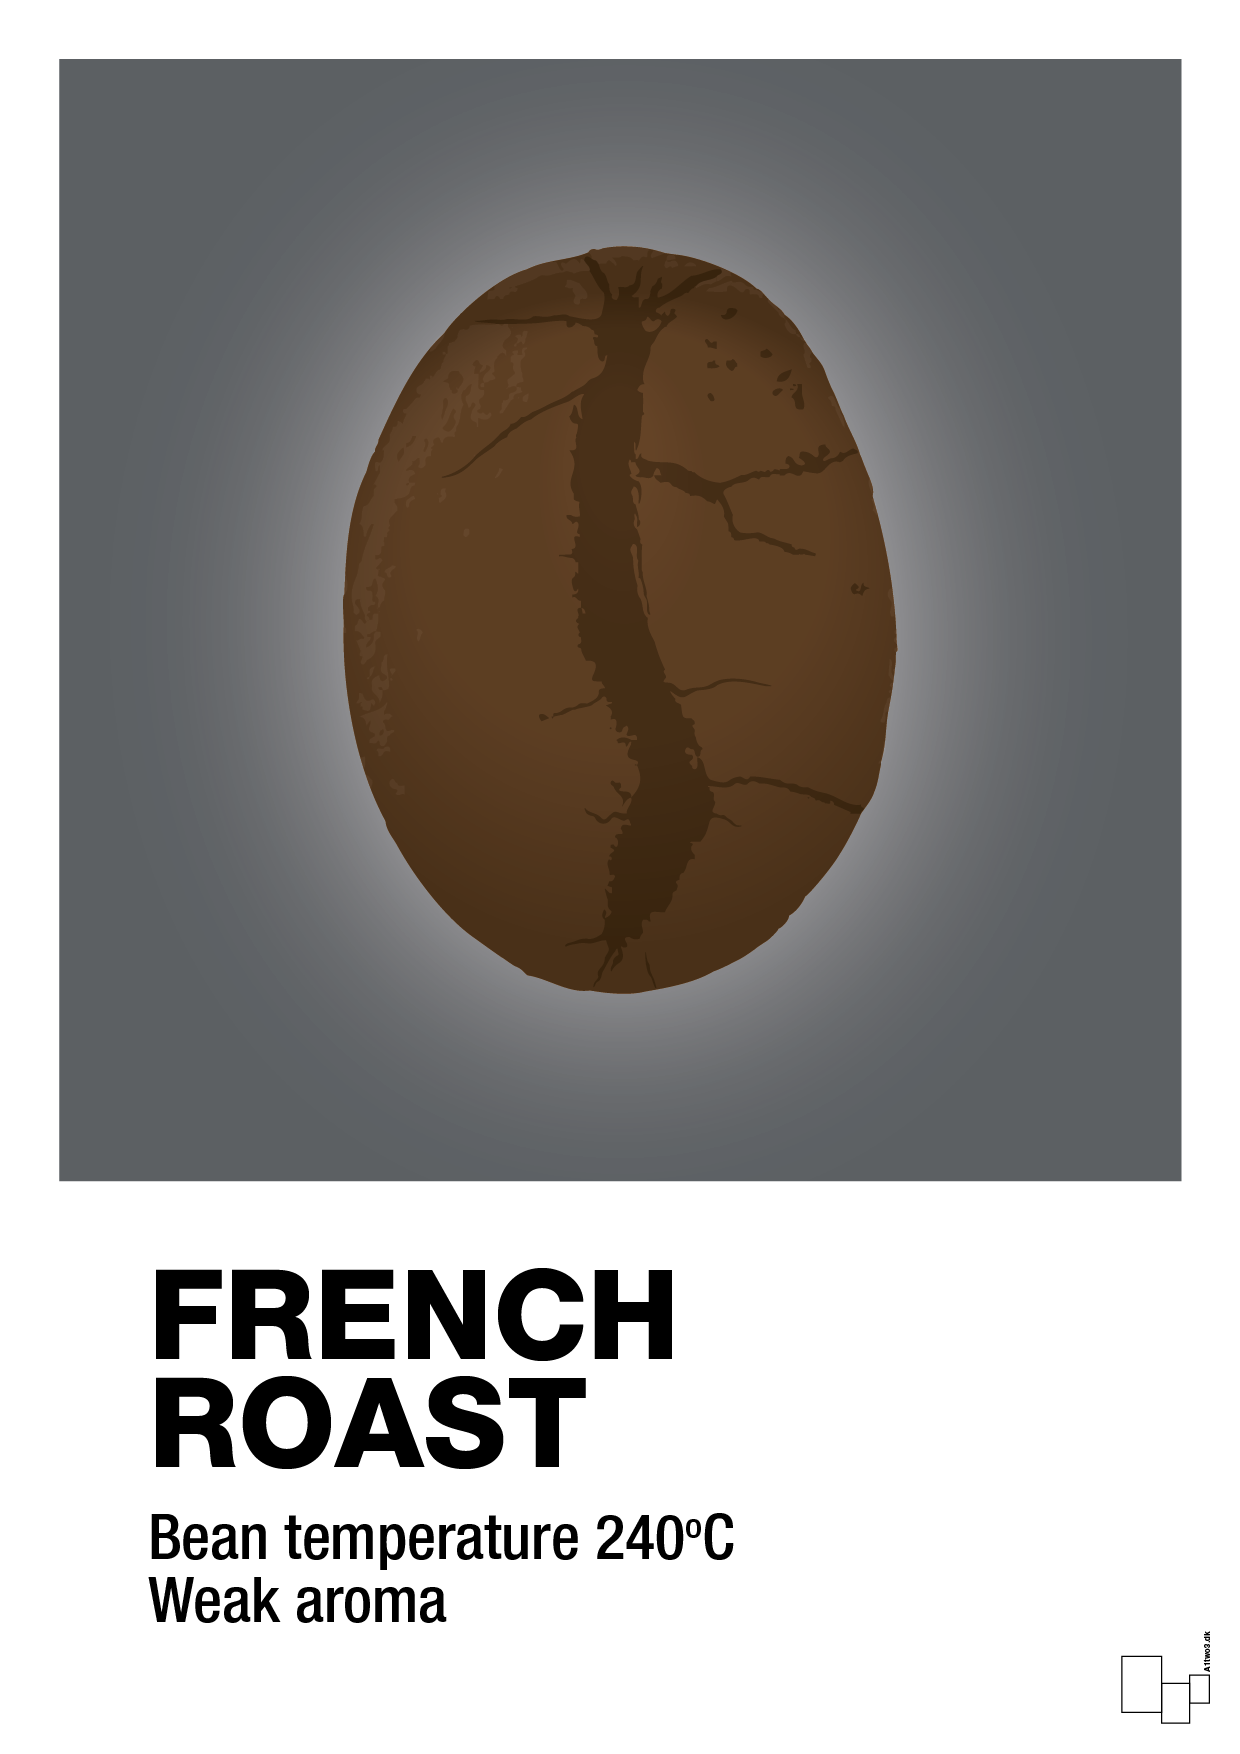 french roast - Plakat med Mad & Drikke i Graphic Charcoal